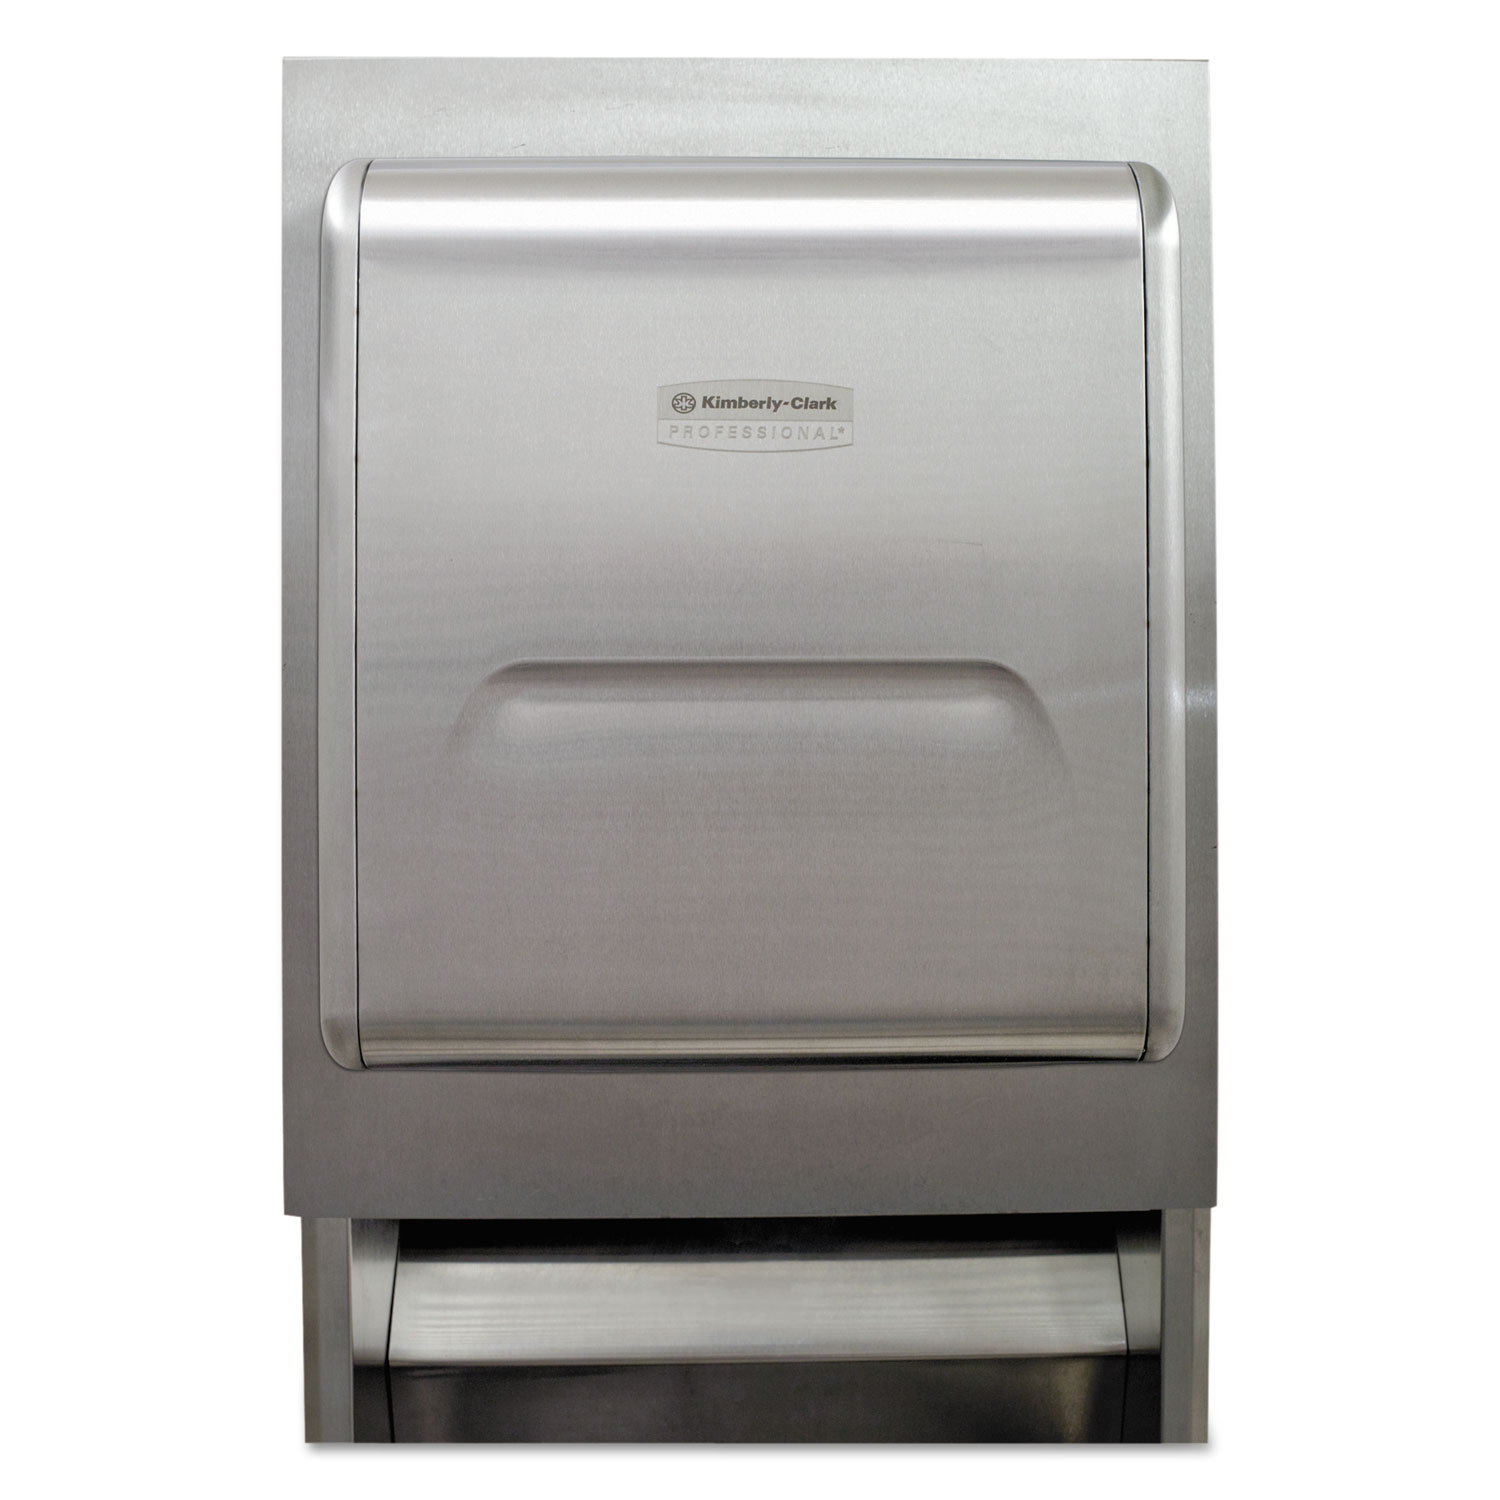 Kimberly-Clark Professional MOD Recessed Dispenser Housing with Trim Panel, 11.13 x 4 x 15.37, Stainless Steel